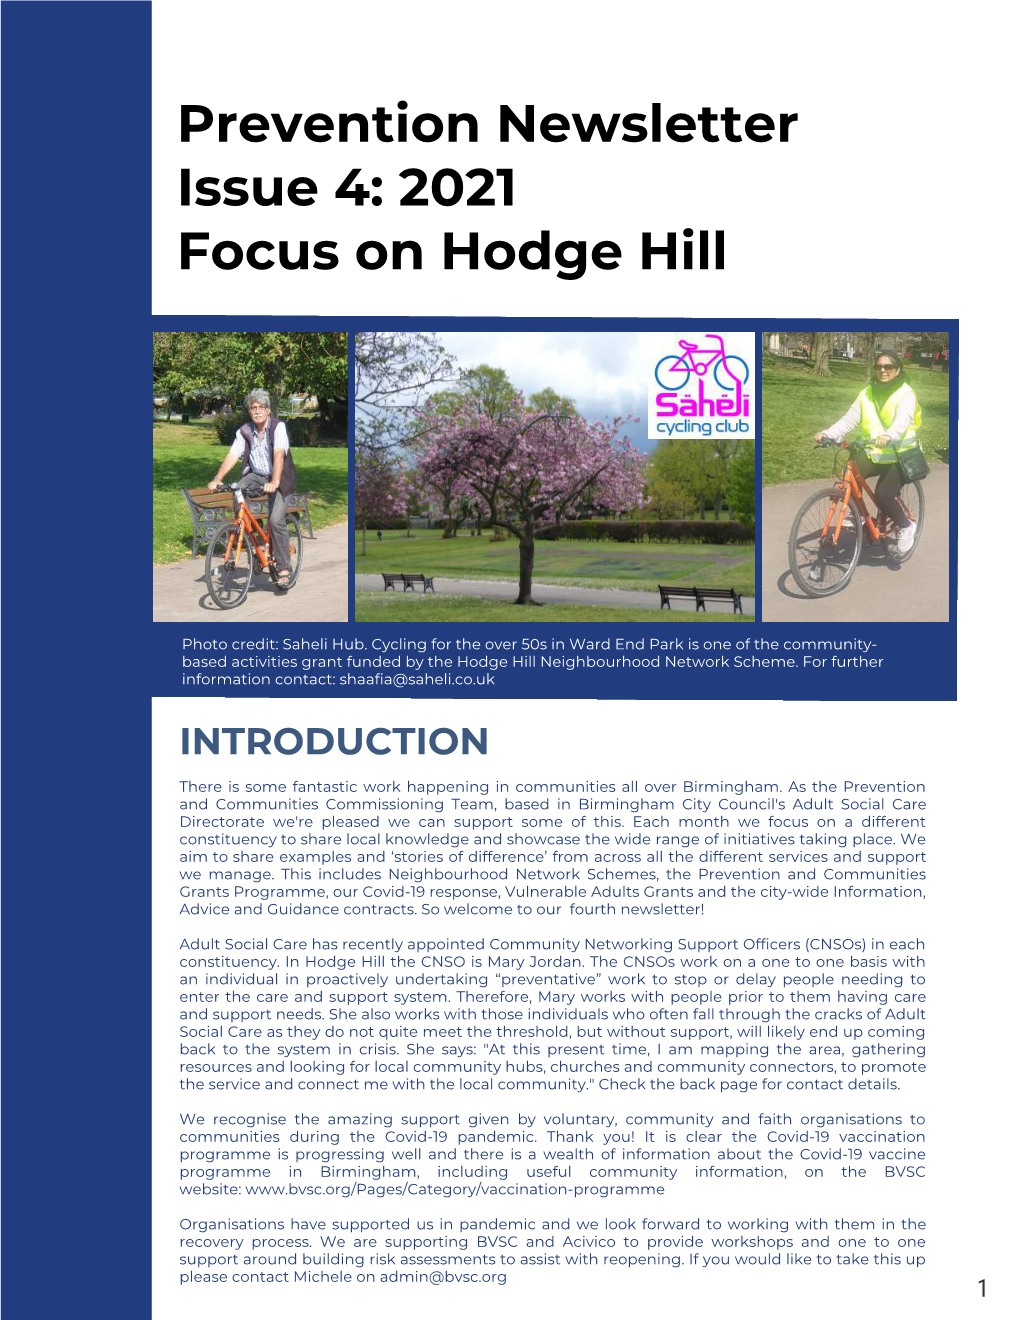 2021 Focus on Hodge Hill